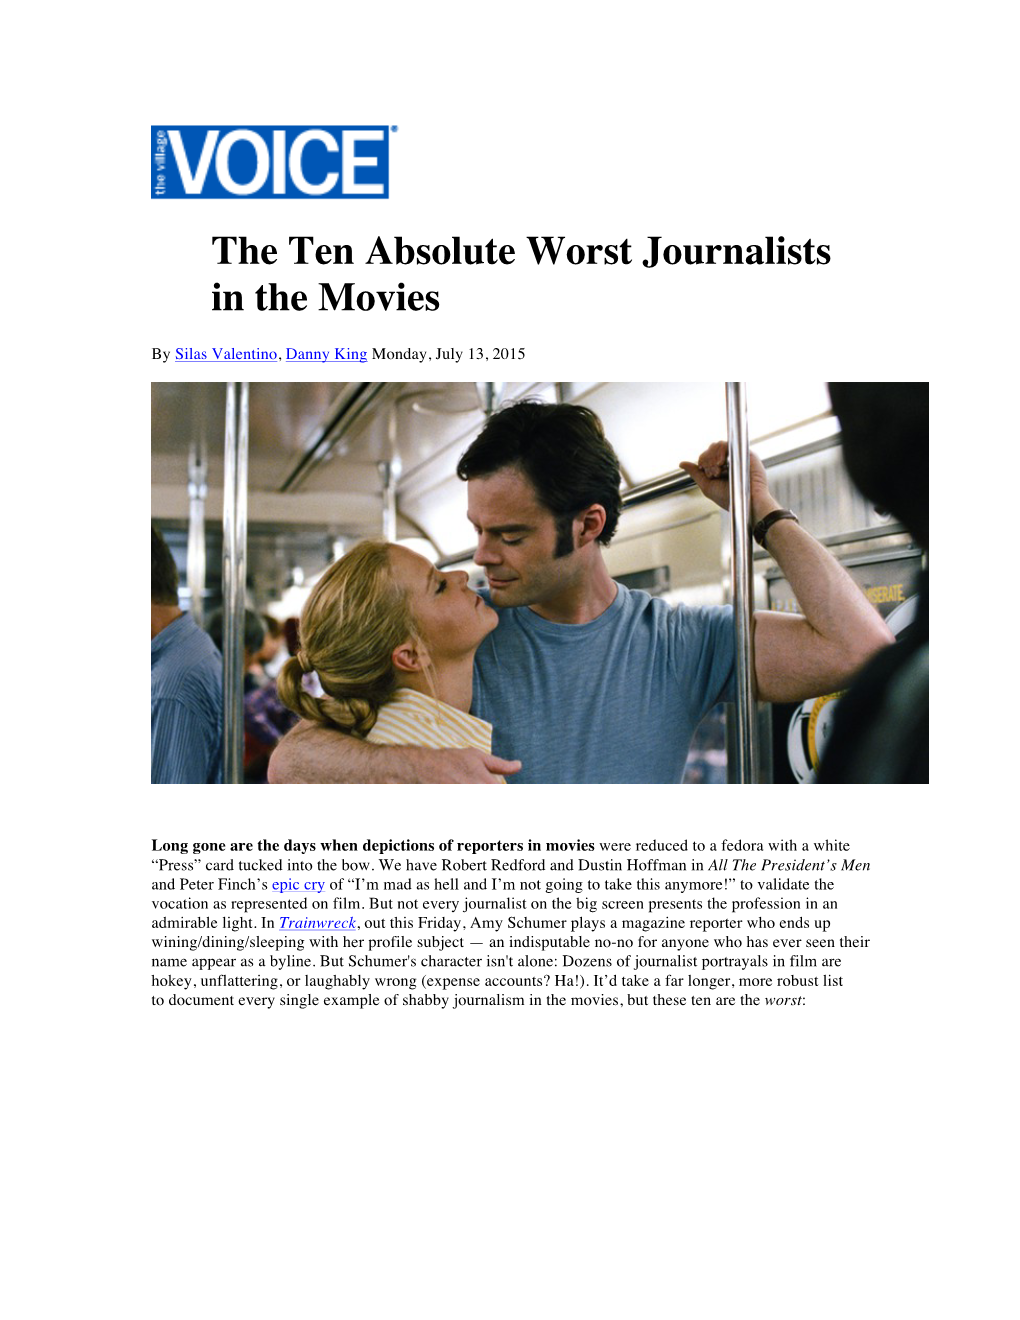 "The Ten Absolute Worst Journalists in the Movies" by Silas Valentino And